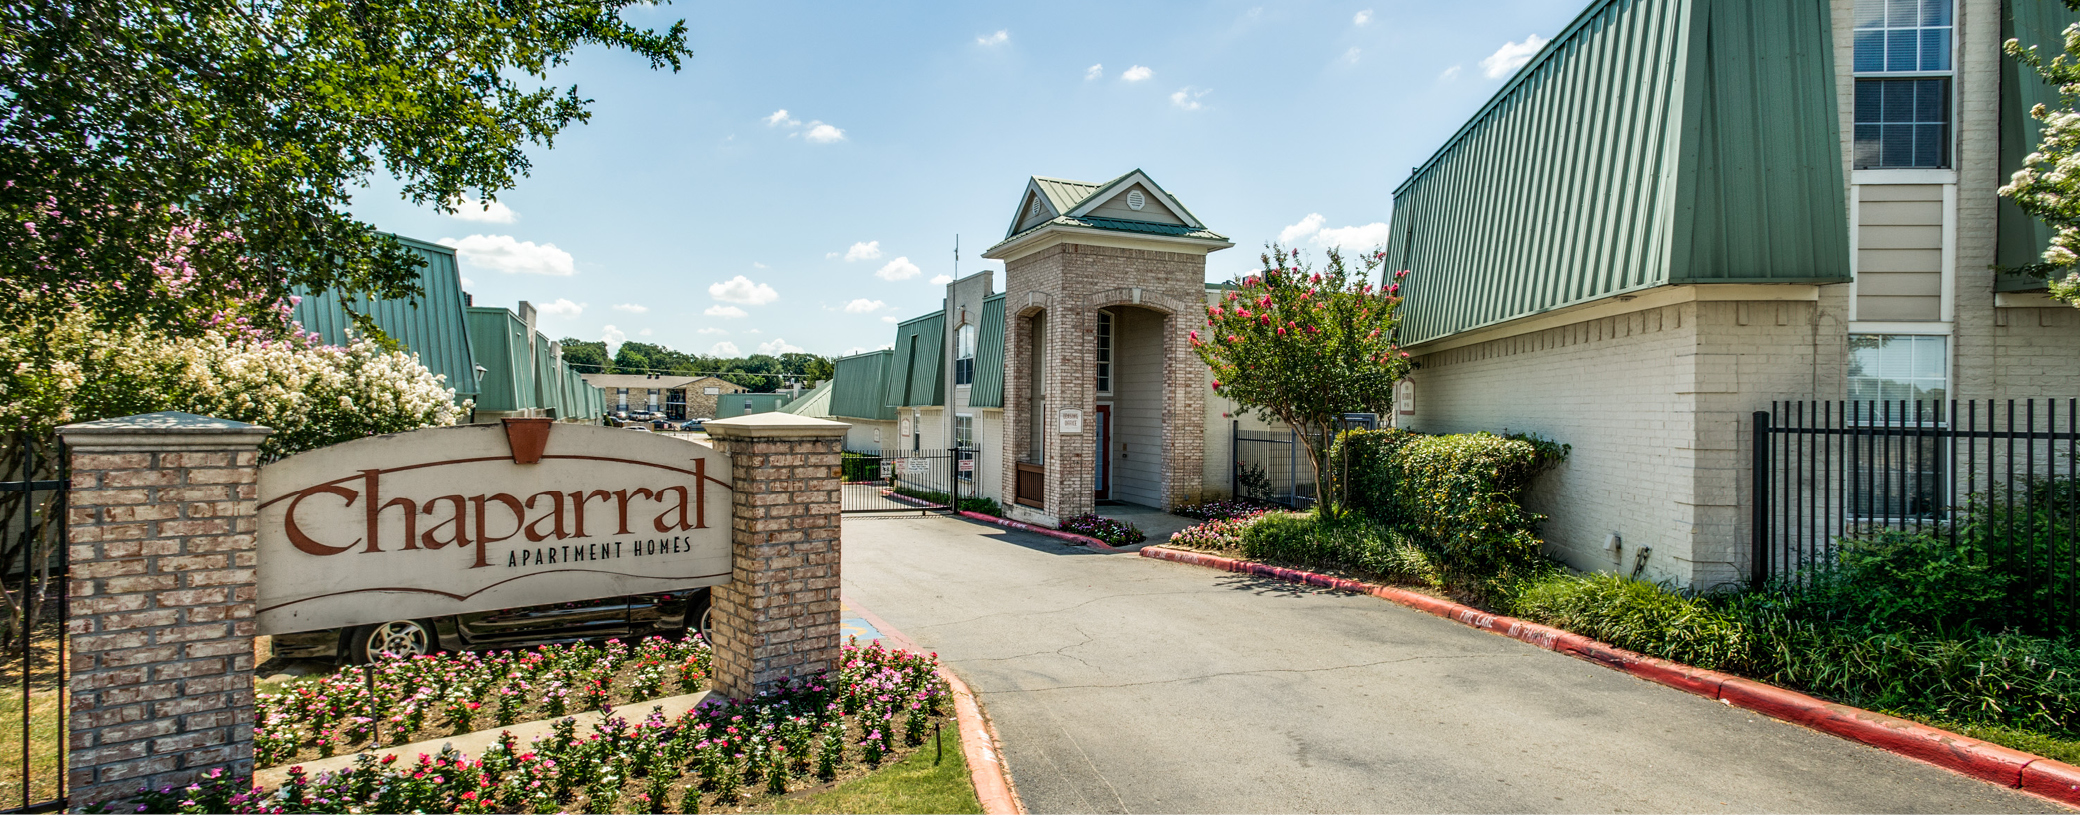 The entrance to Chaparral Apartment Homes with the signage to the left and buildings in the background and the right.